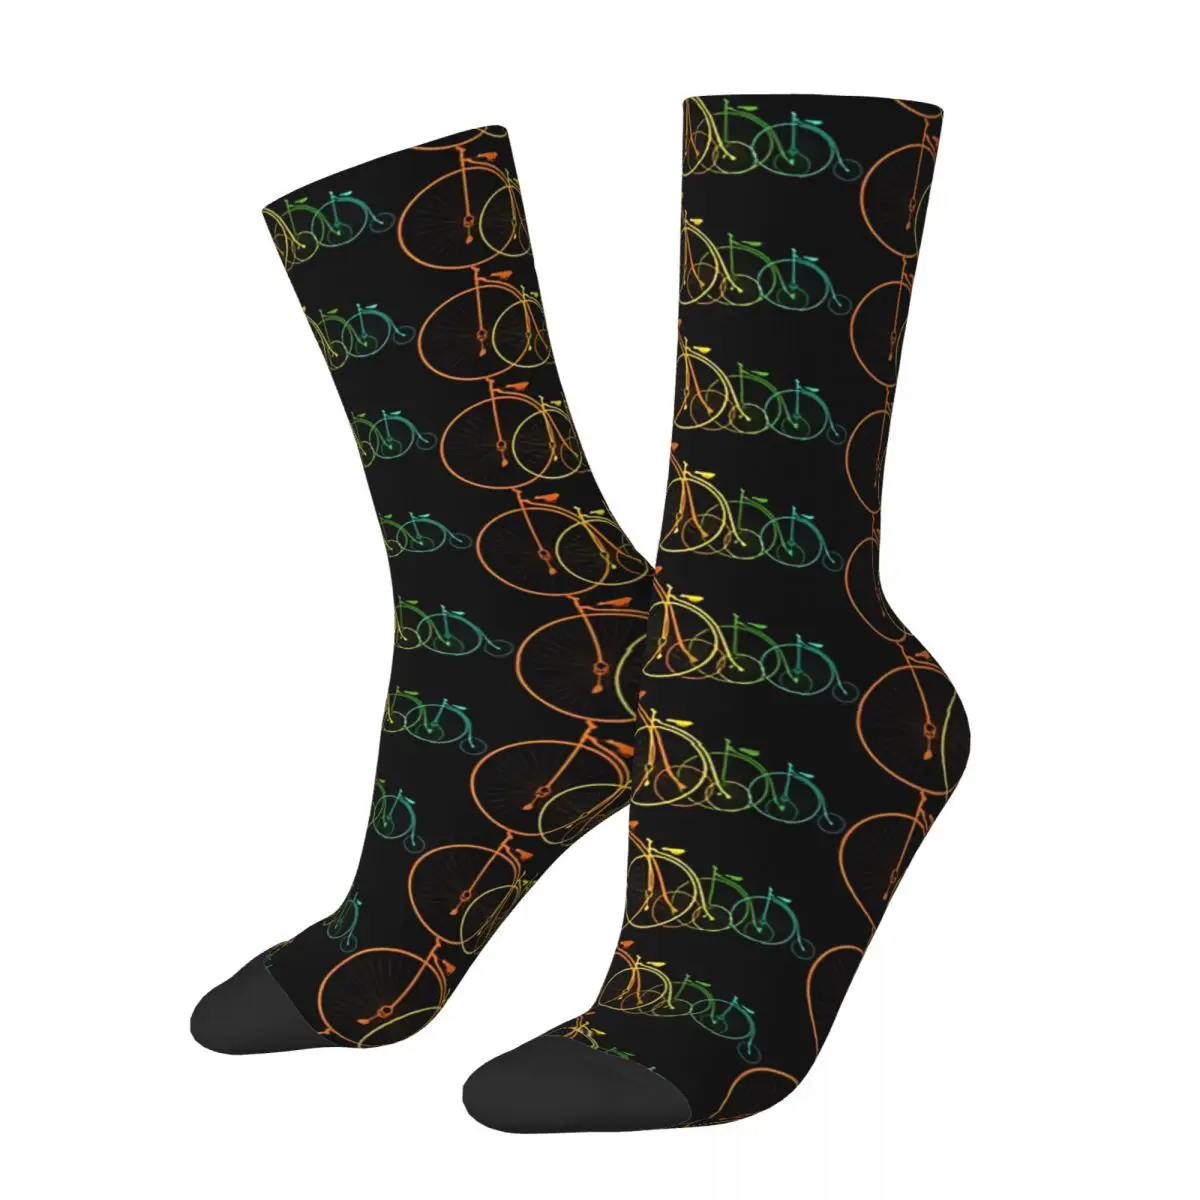 

Hip Hop Retro Penny Farthing Cyclists Crazy Men's Socks Bicycle Bike Unisex Street Style Printed Funny Happy Crew Sock Boys Gift